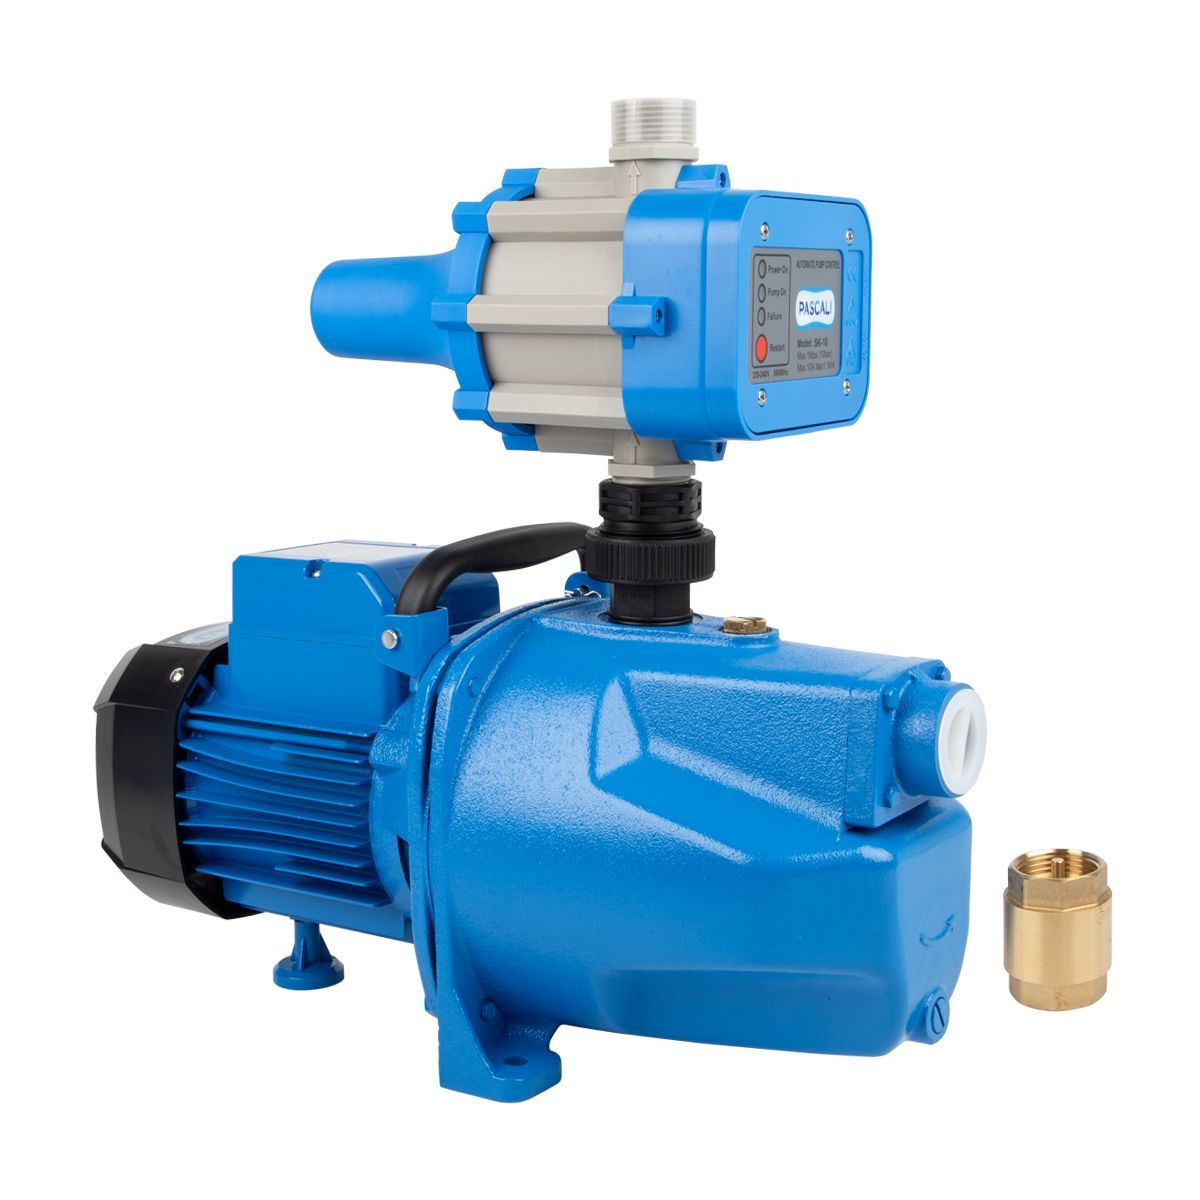 Pascali Self Priming Pump Jet 0 75kw With Flow Switch Shop Today Get